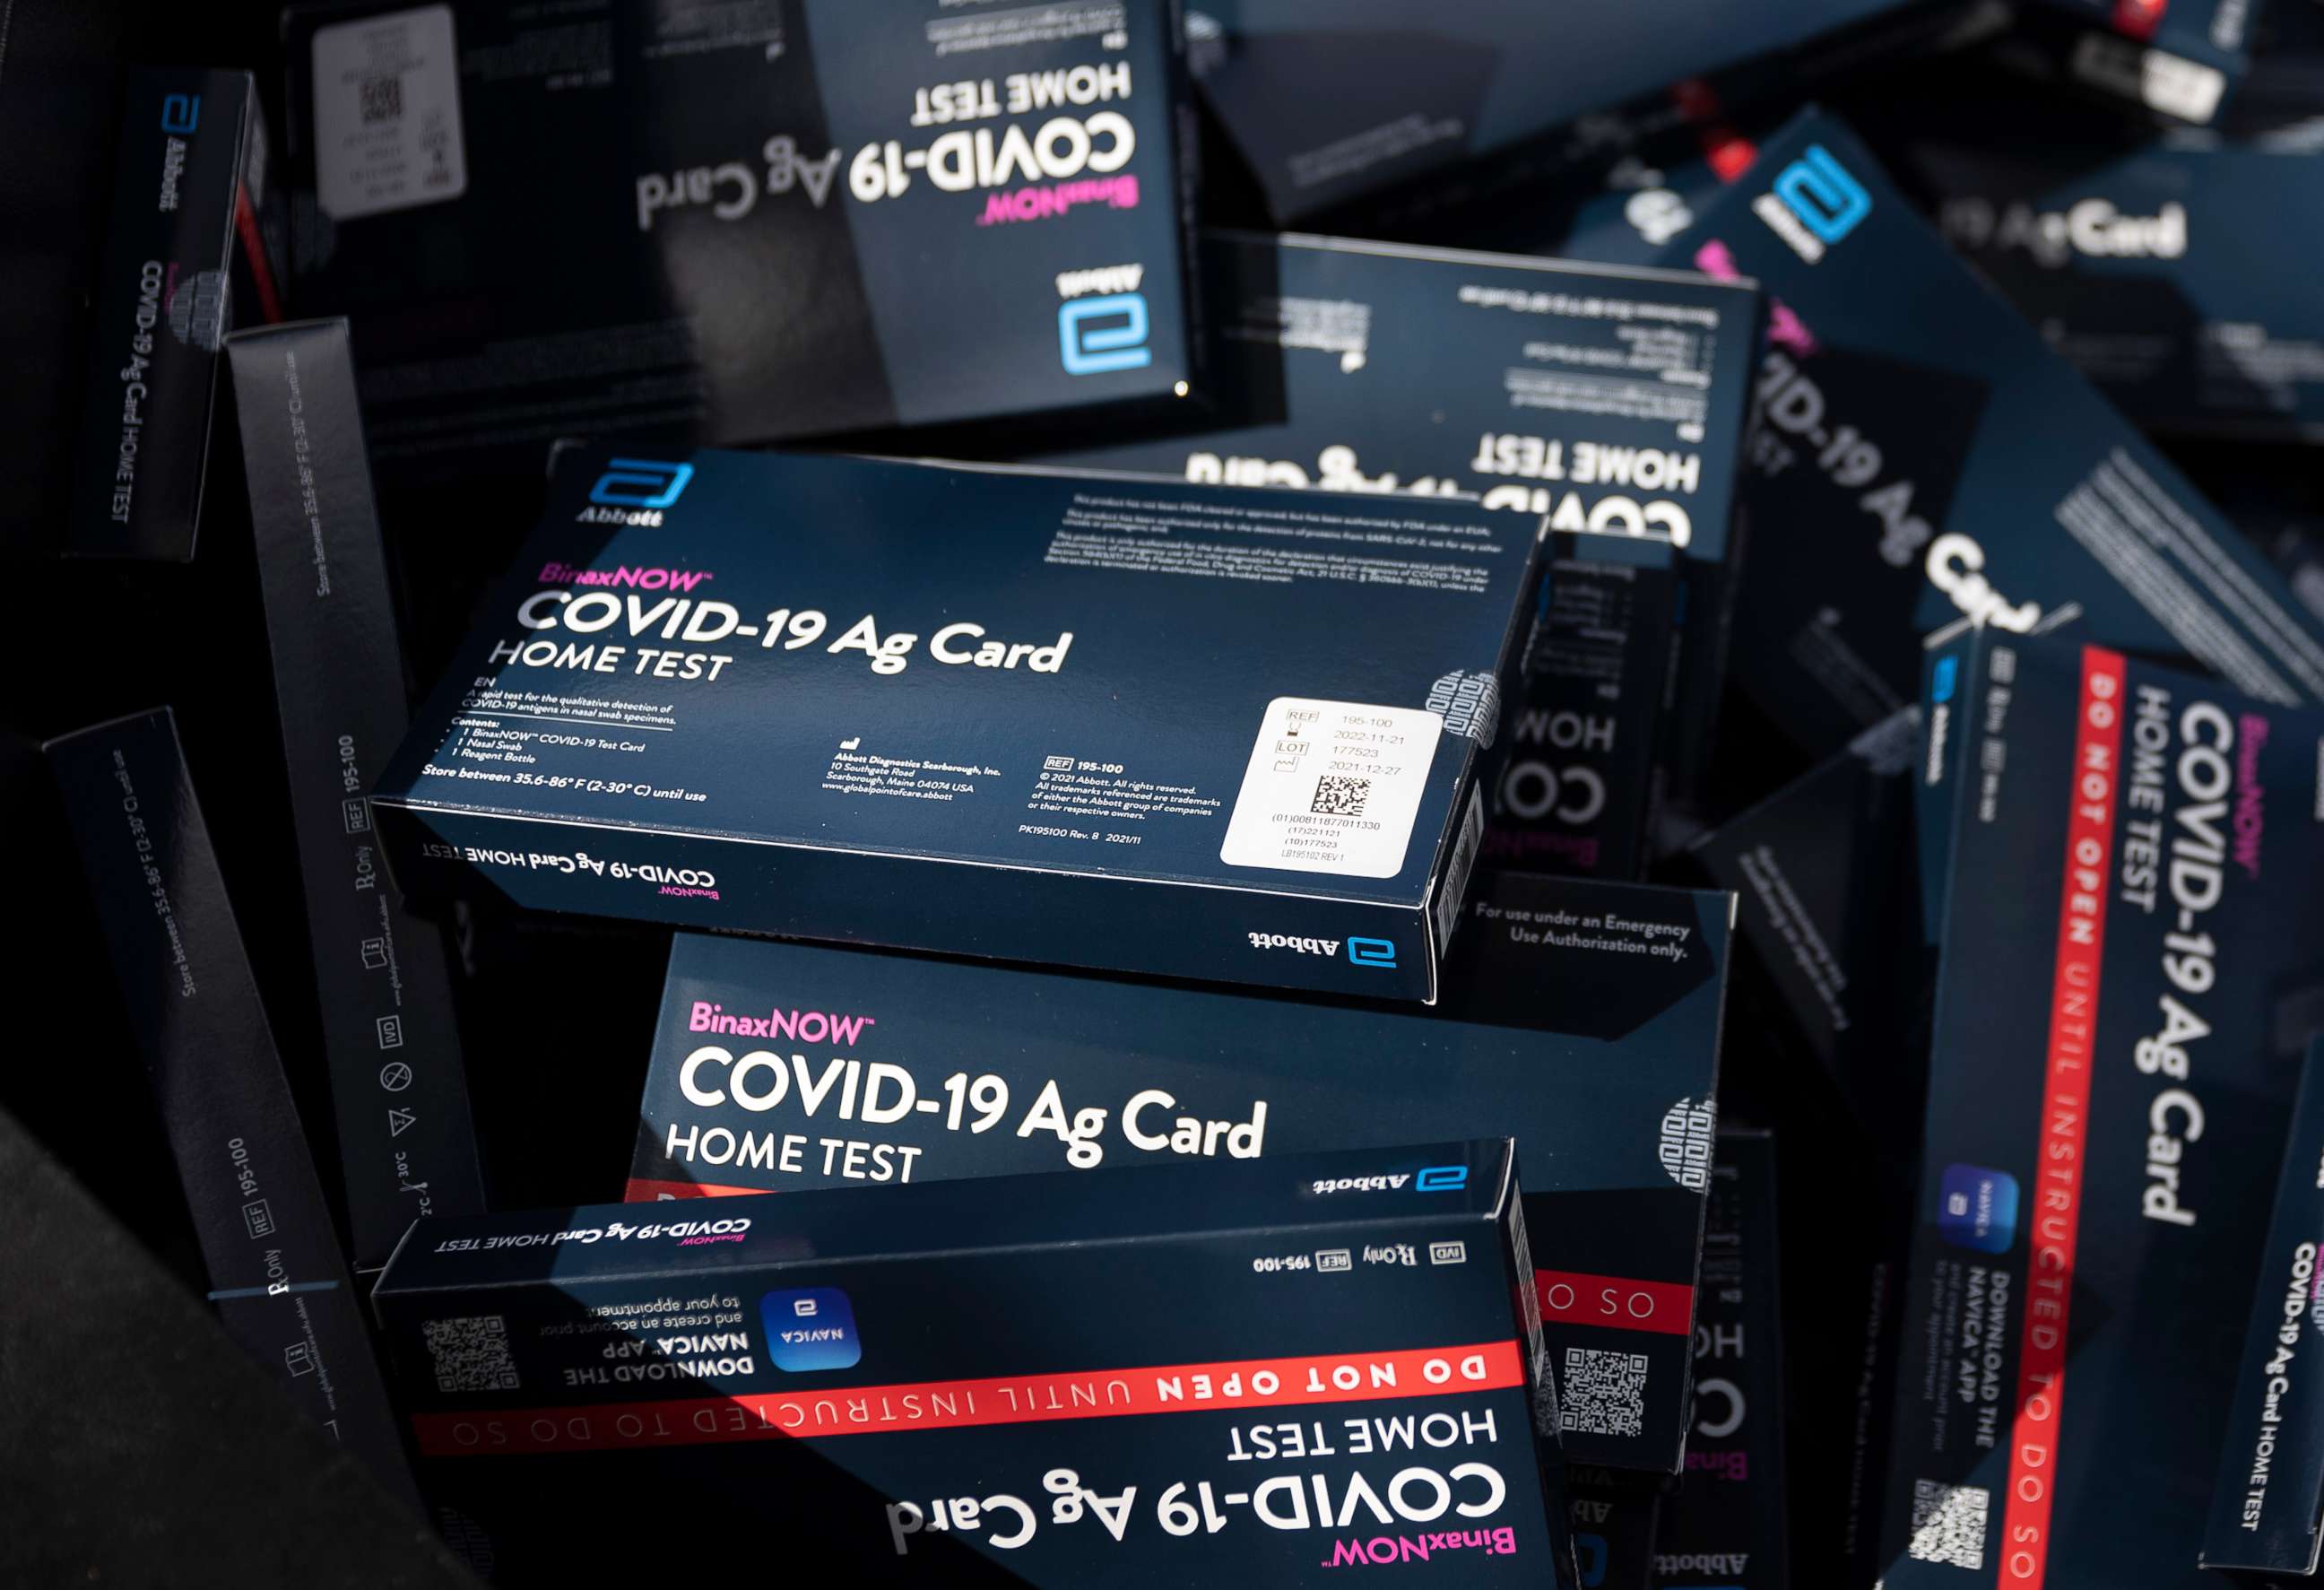 PHOTO: COVID-19 at-home rapid test kits are given away during a drive-thru event at the Hollywood library, Dec. 30, 2021, in Hollywood, Fla.